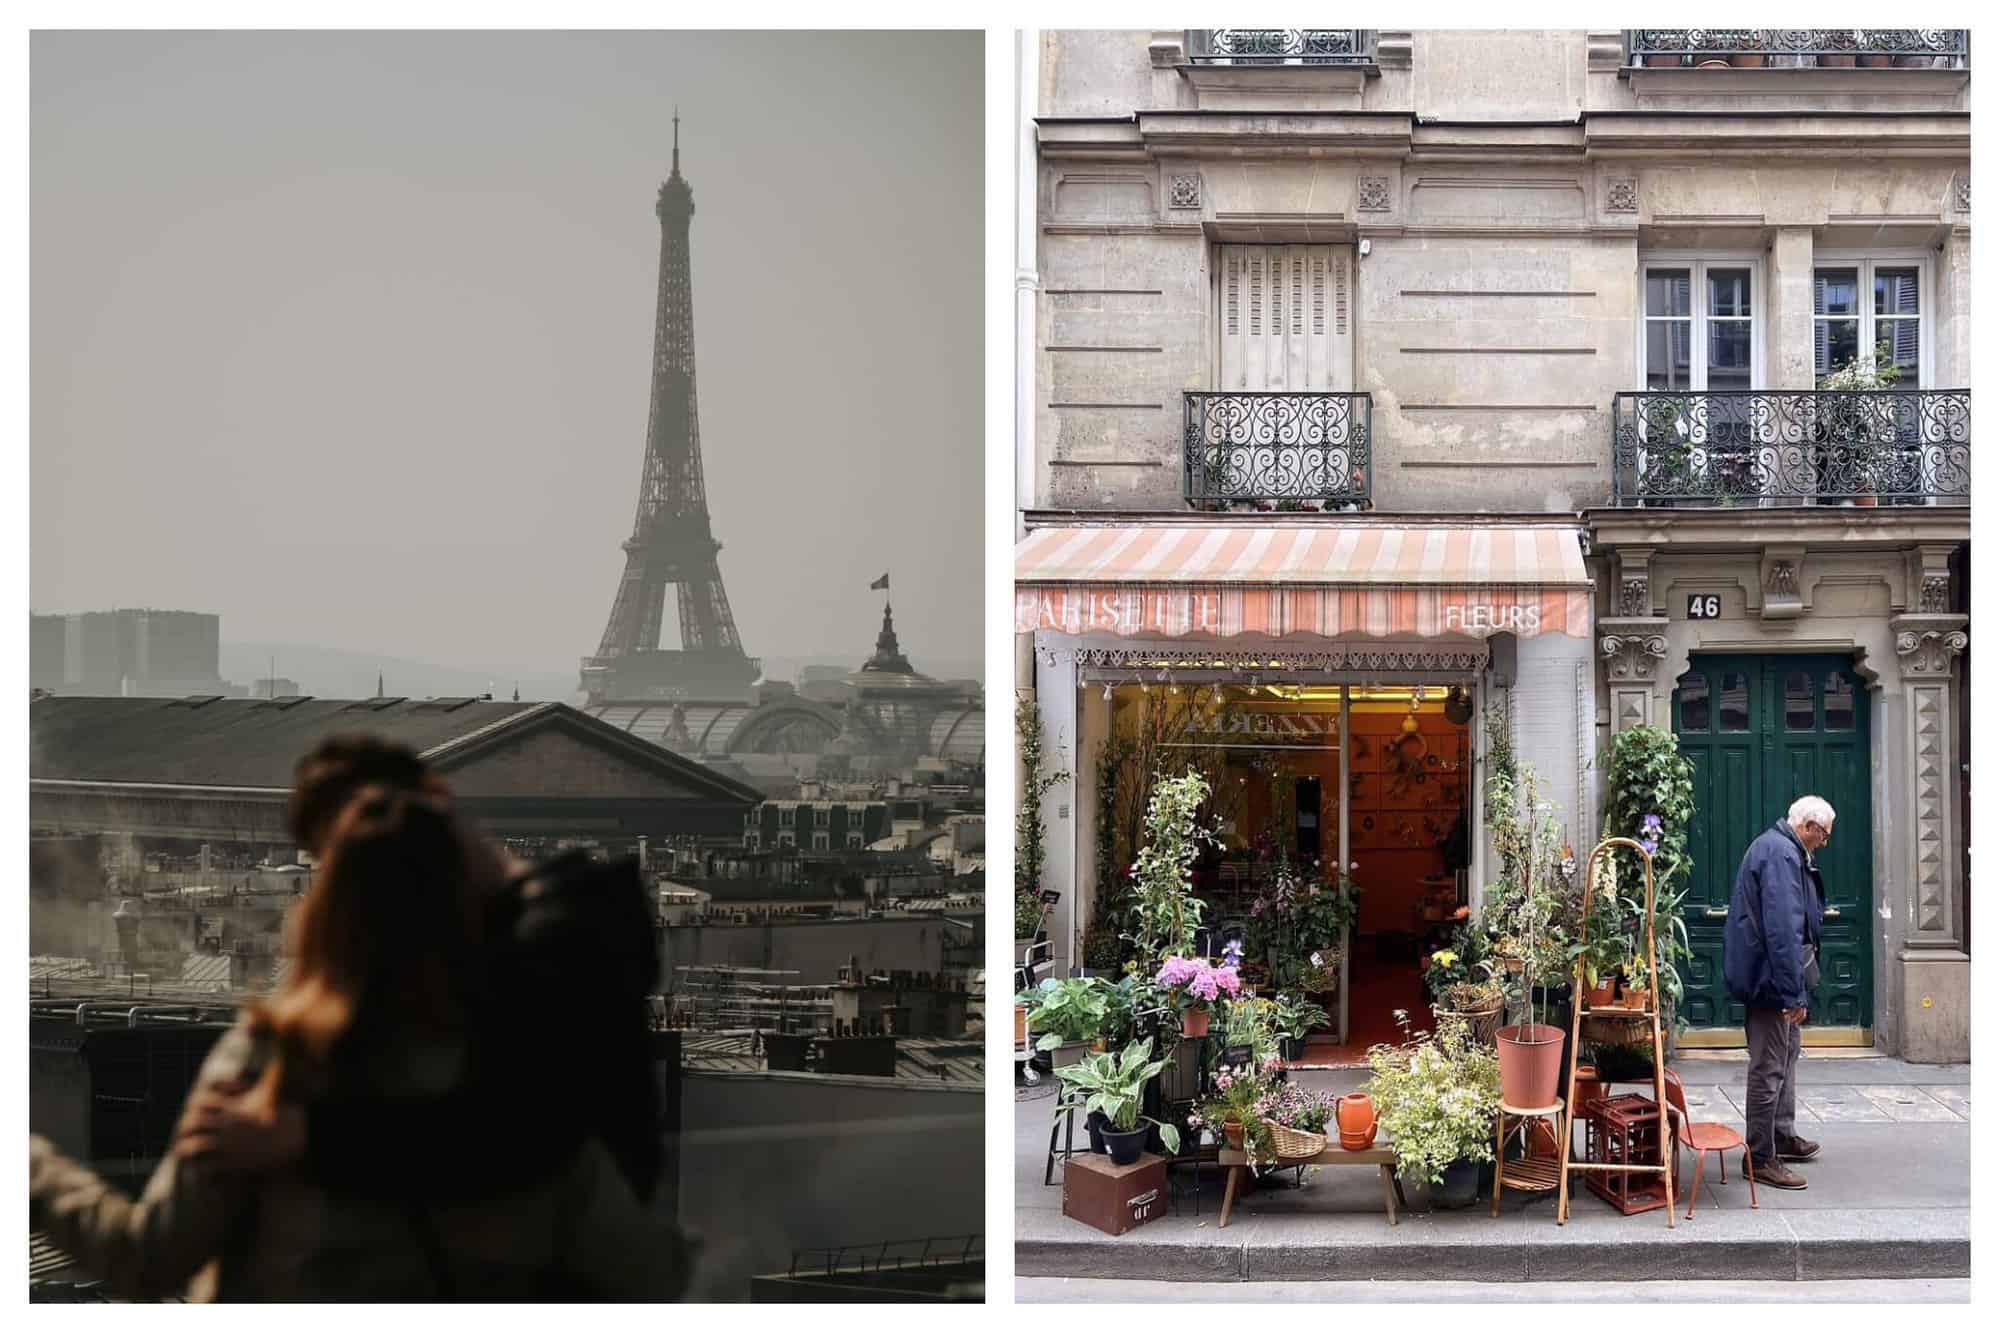 Left: A couple kiss in a gray day in Paris with the Eiffel Tower in the background. Right: A man with gray hair walks past a pink Parisian flower shop.